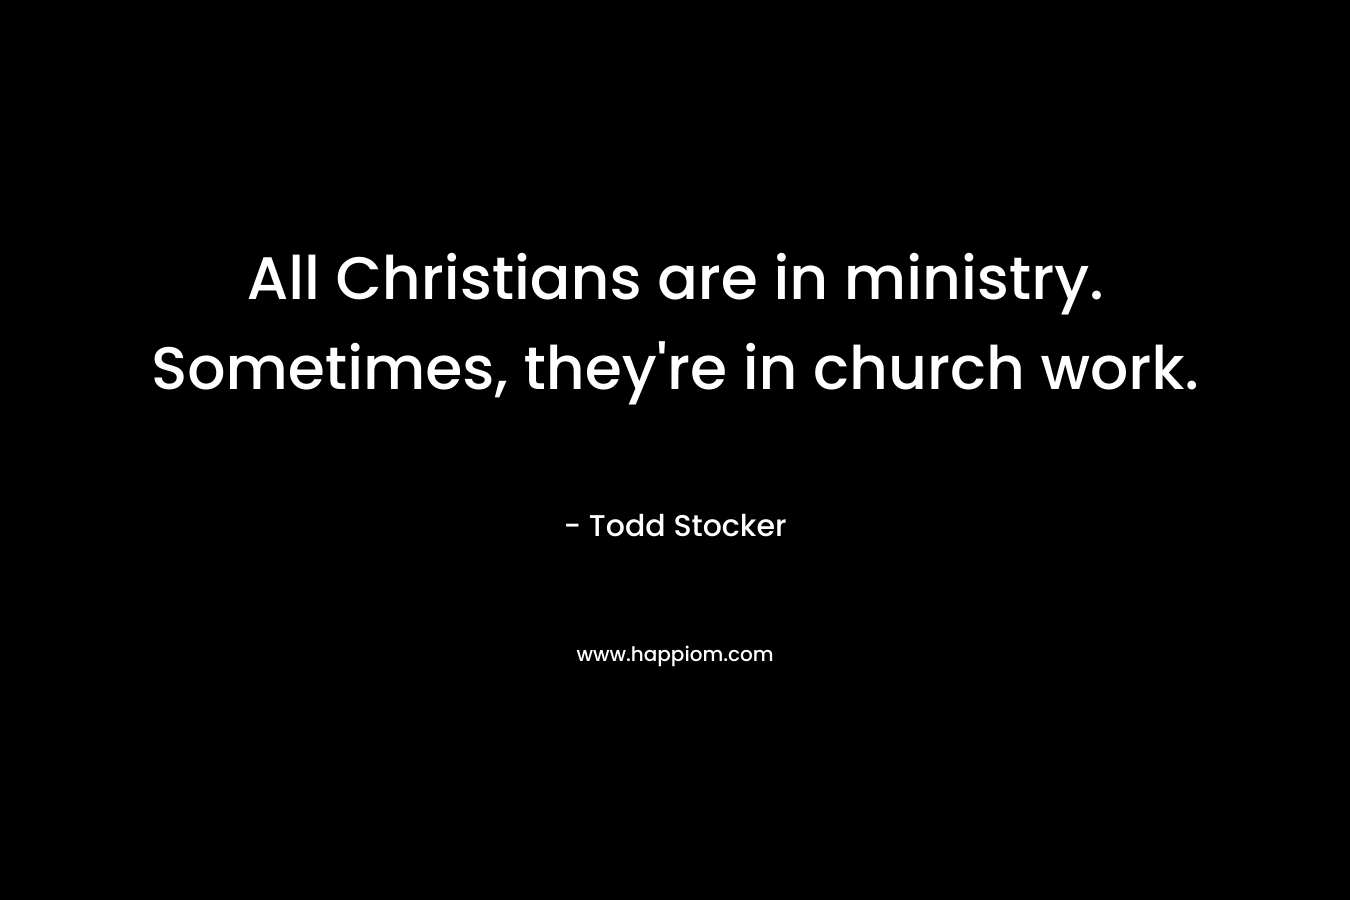 All Christians are in ministry. Sometimes, they're in church work.